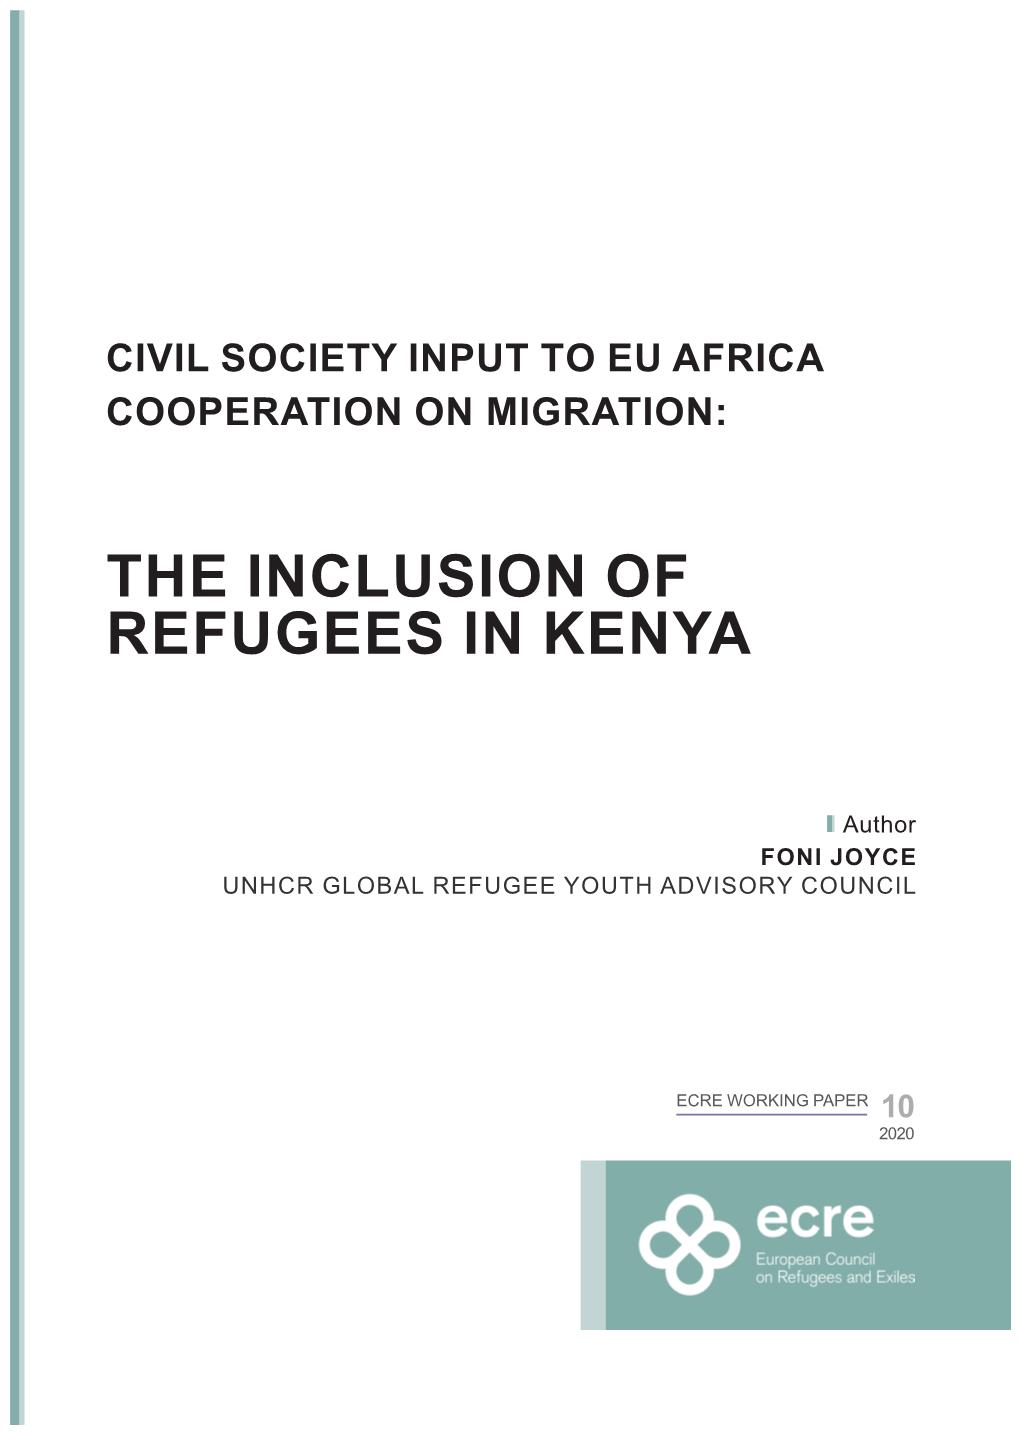 The Inclusion of Refugees in Kenya